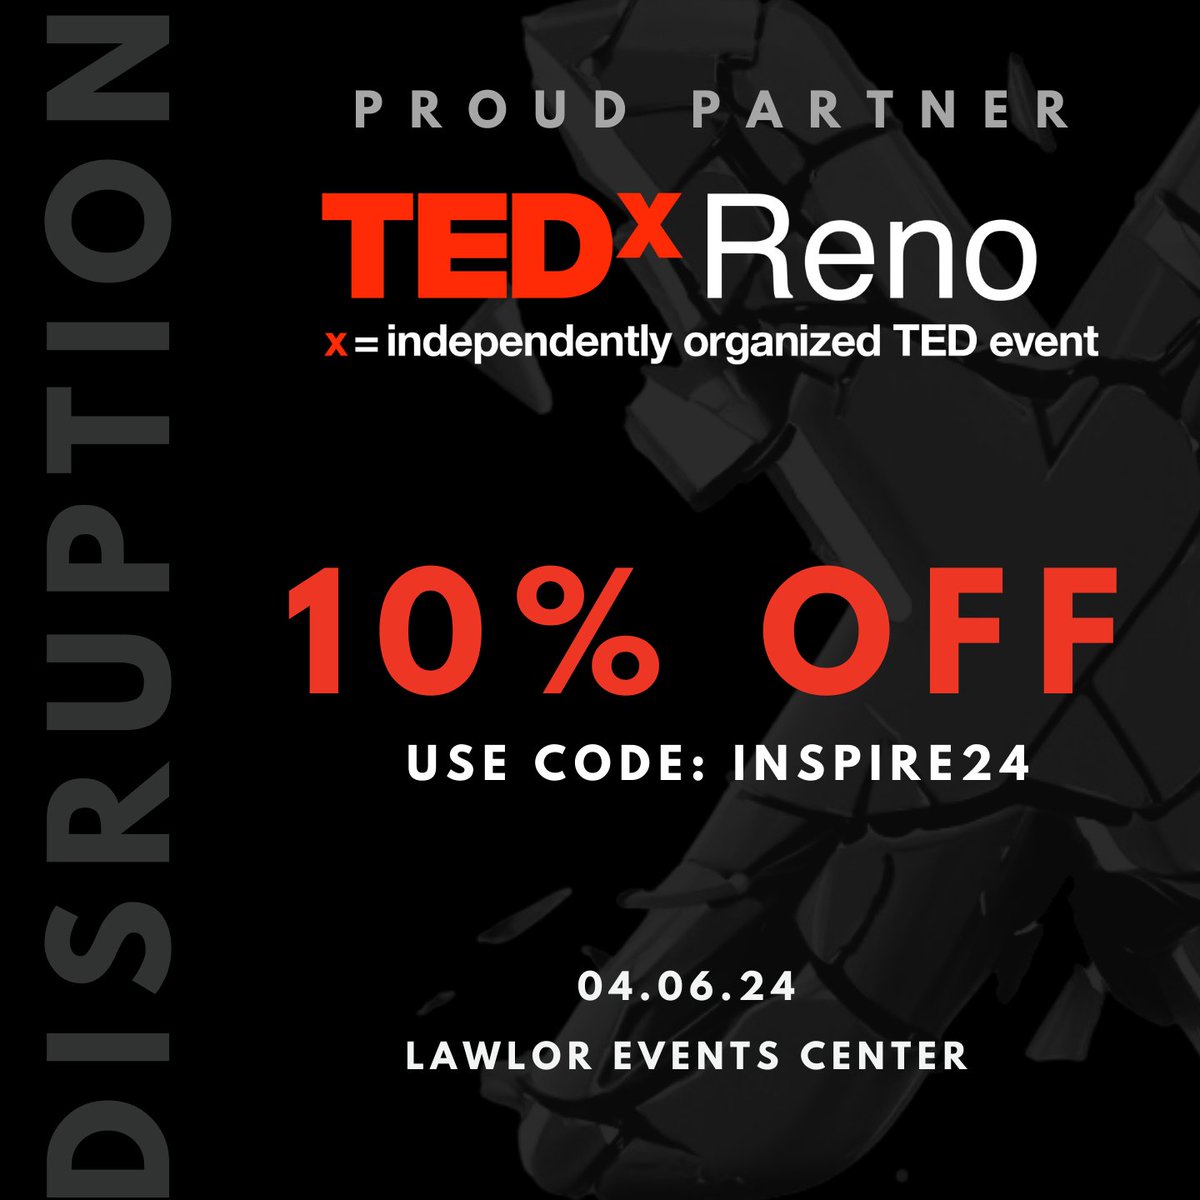 We are proud to be partnering with @tedxreno for their event this Saturday, DISRUPTION at the Lawlor Events Center. Don't miss out on one of Reno's most inspiring events. Use code INSPIRE24 for 10% off your ticket! #TedXReno #TedXevents #TedX